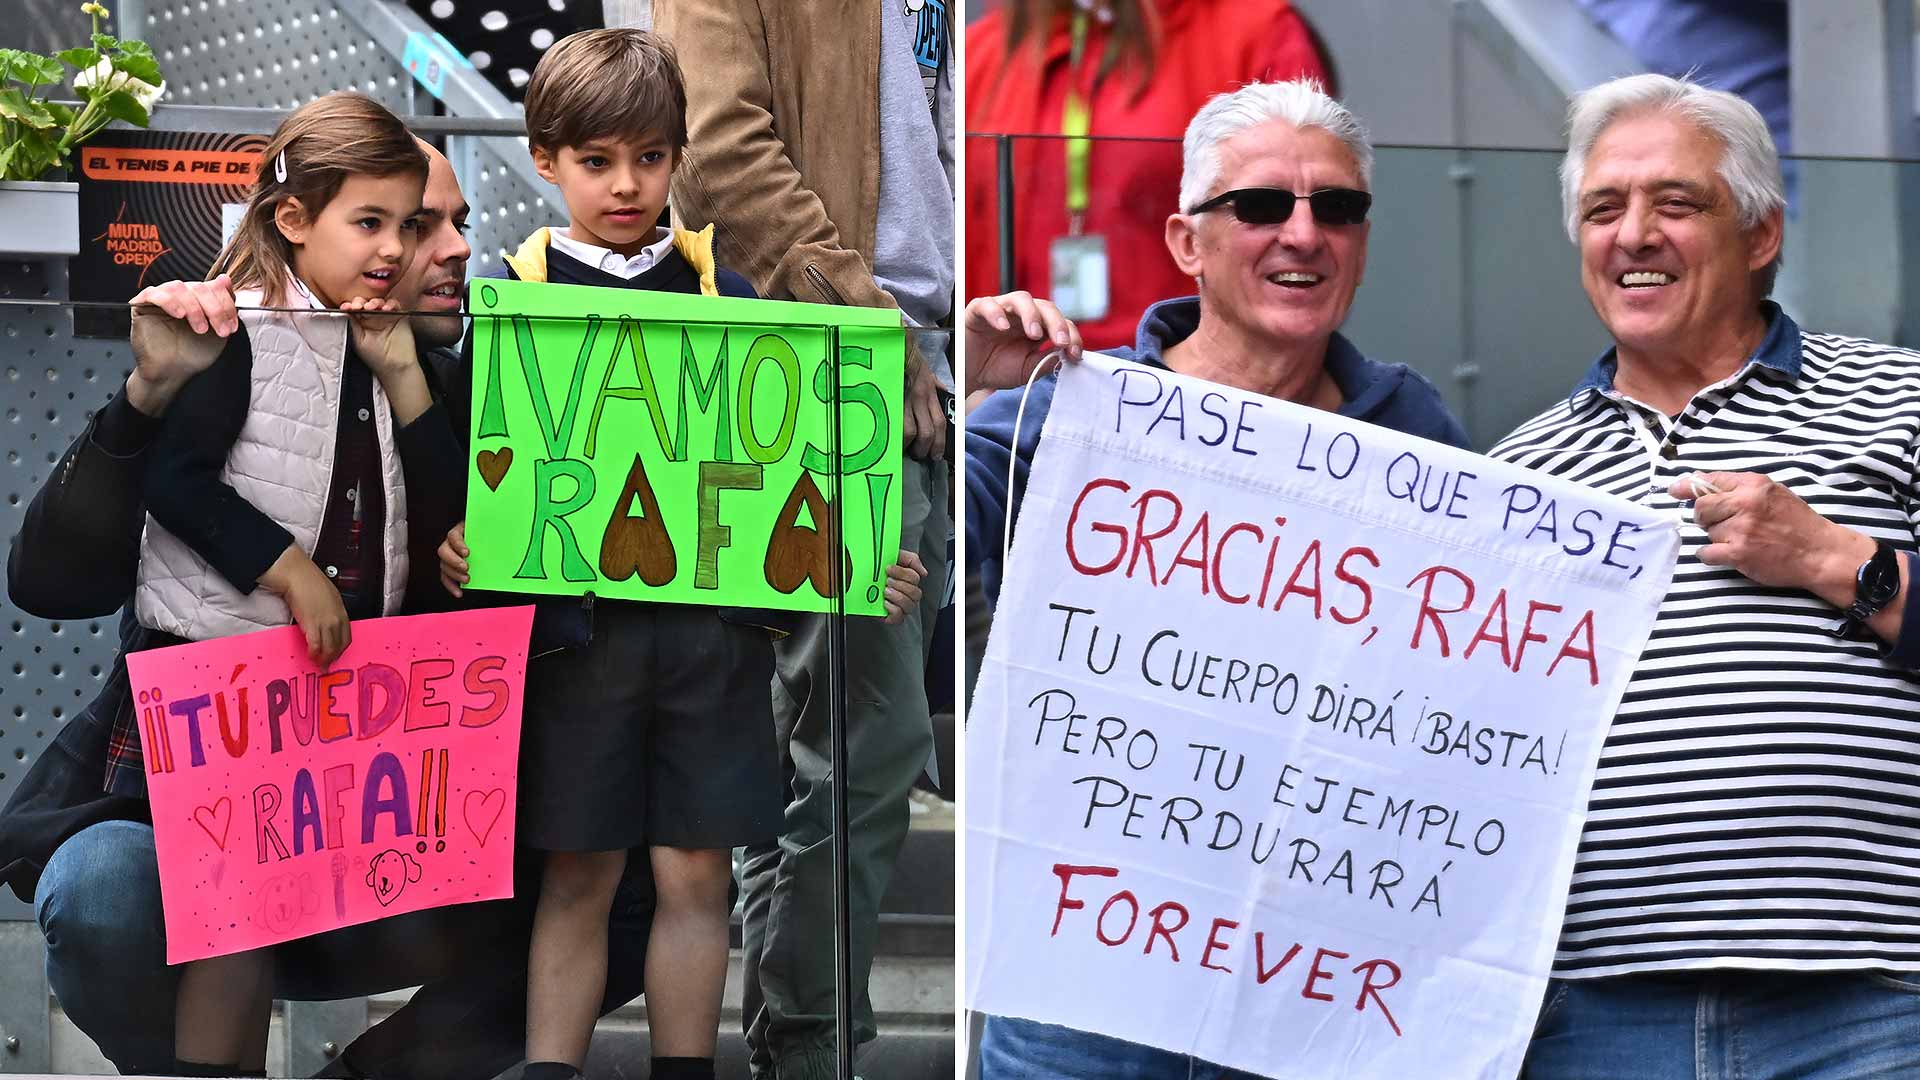 Fans of all ages show their support for <a href='https://www.atptour.com/en/players/rafael-nadal/n409/overview'>Rafael Nadal</a> in Madrid.